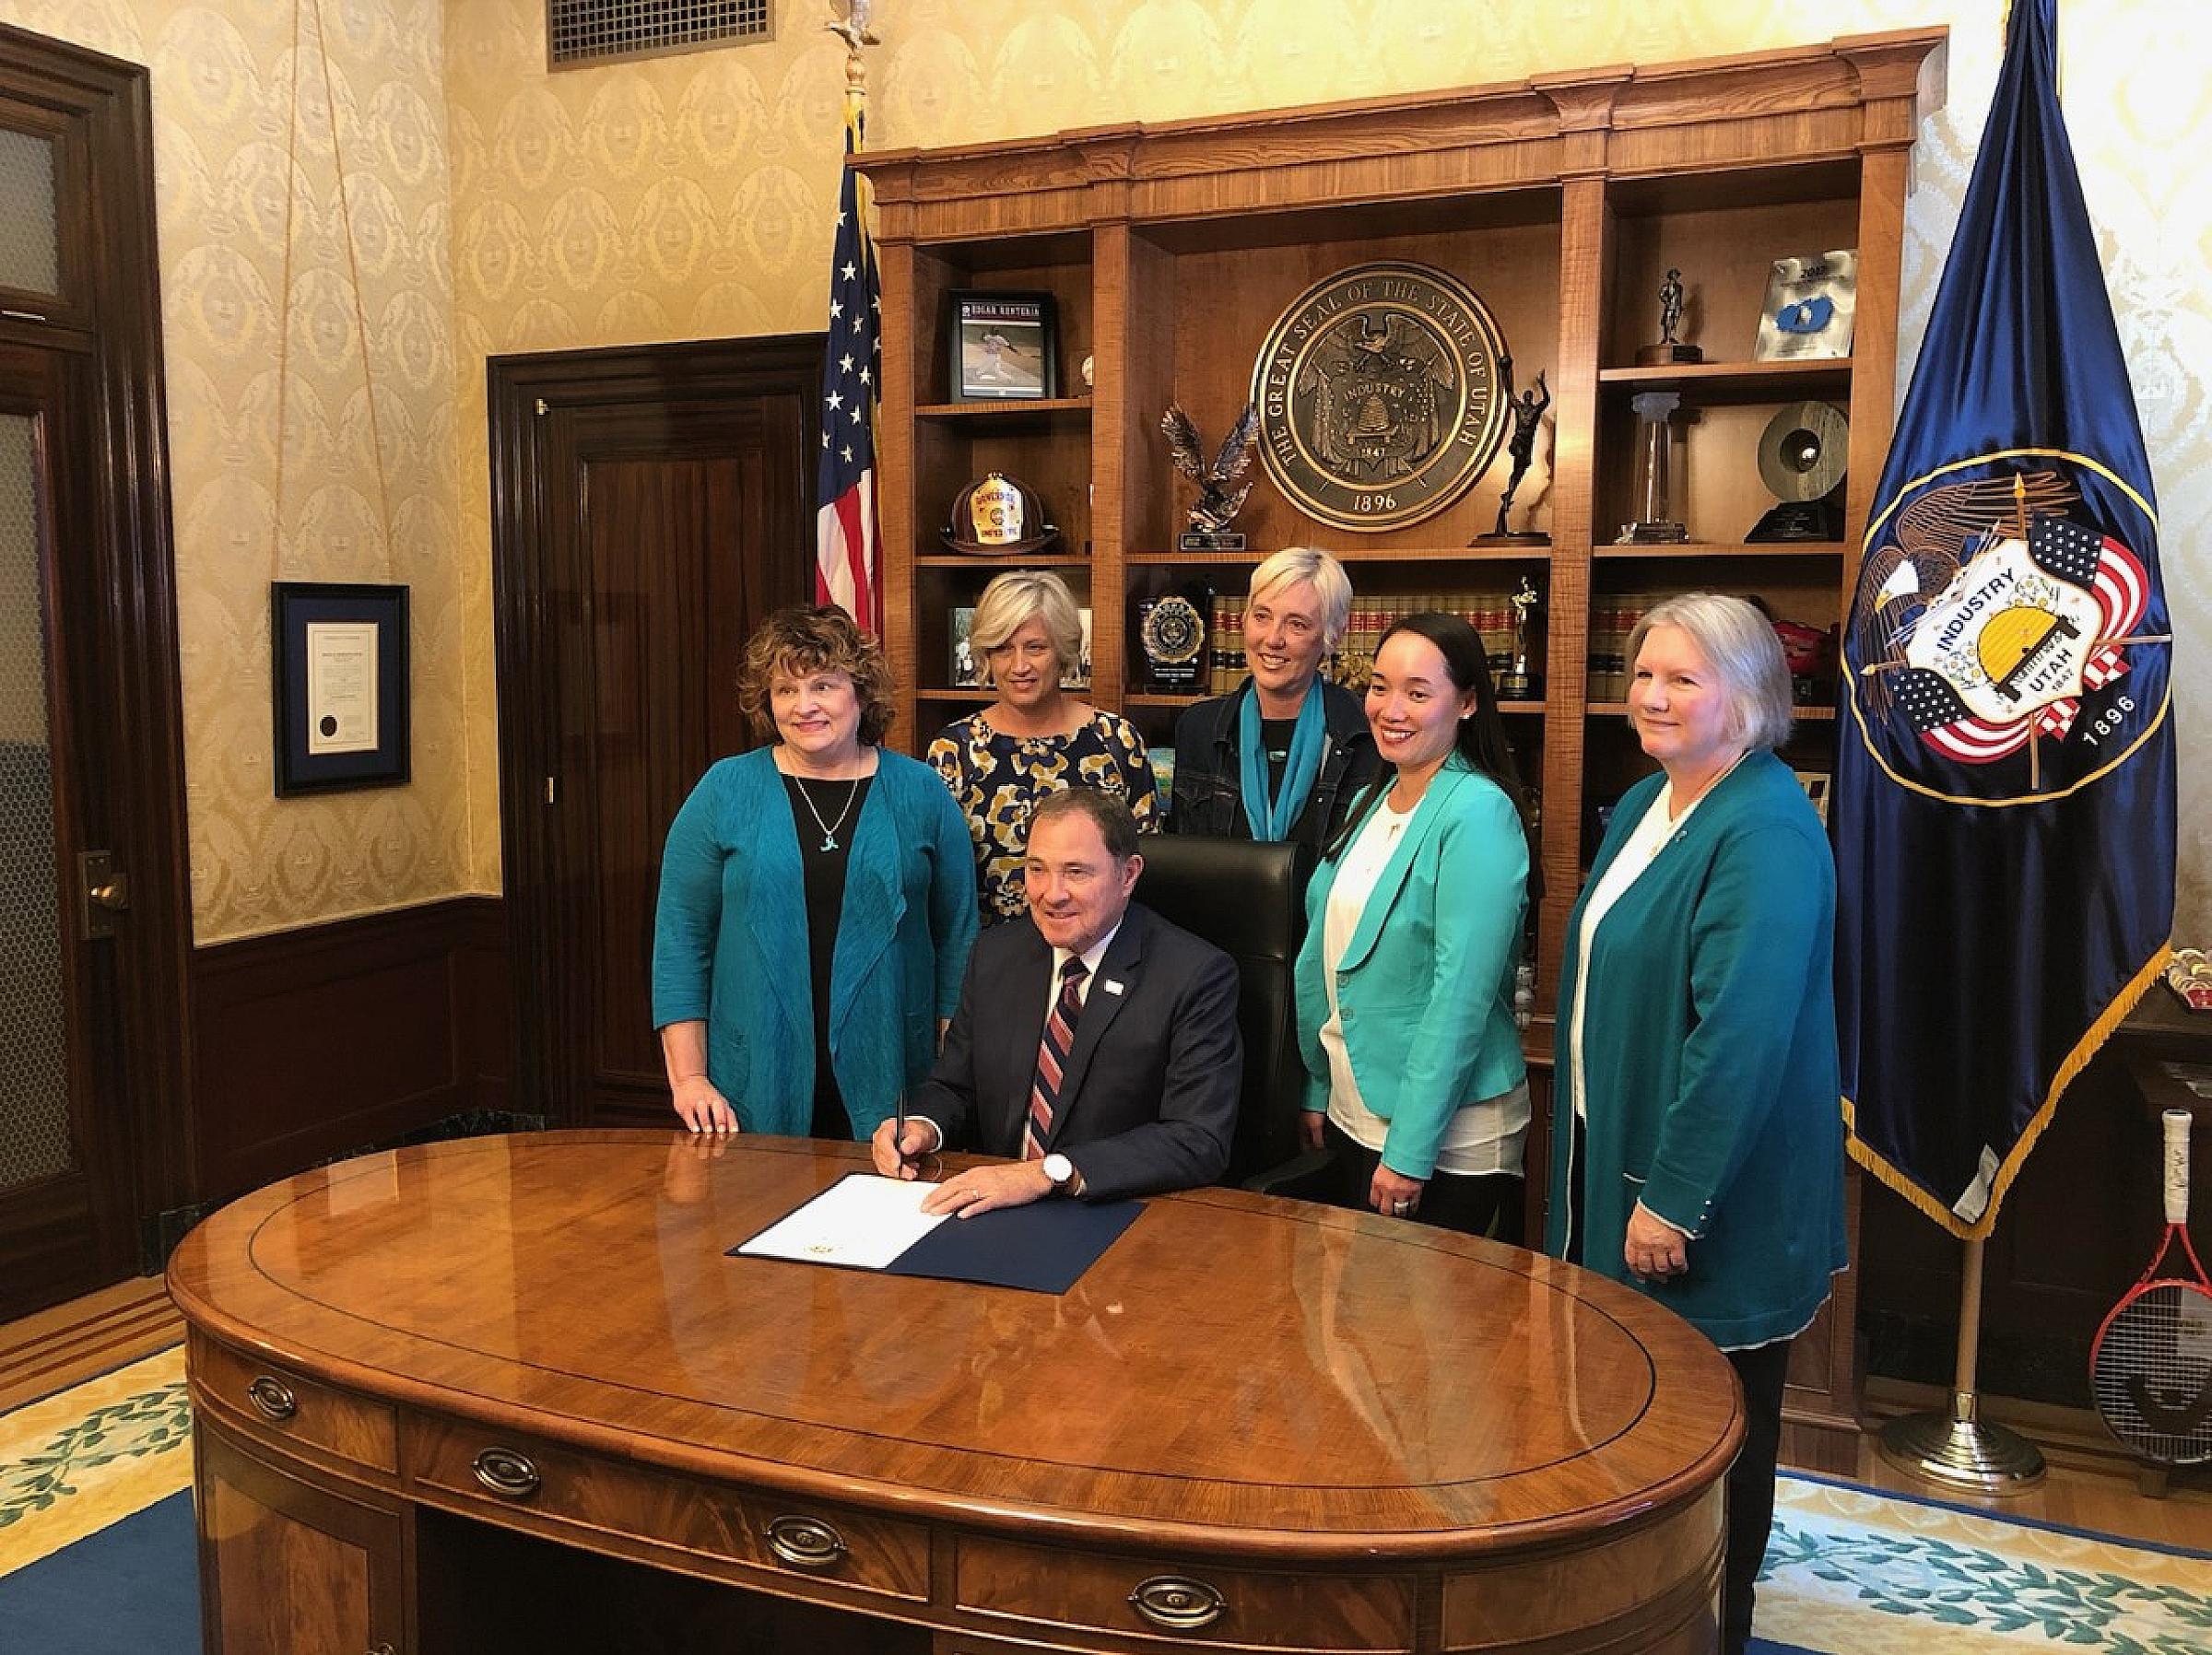 Jan Byrne (far left) with colleagues and Governor Herbert at a ceremony declaring September Ovarian Cancer Awareness Month in 2019